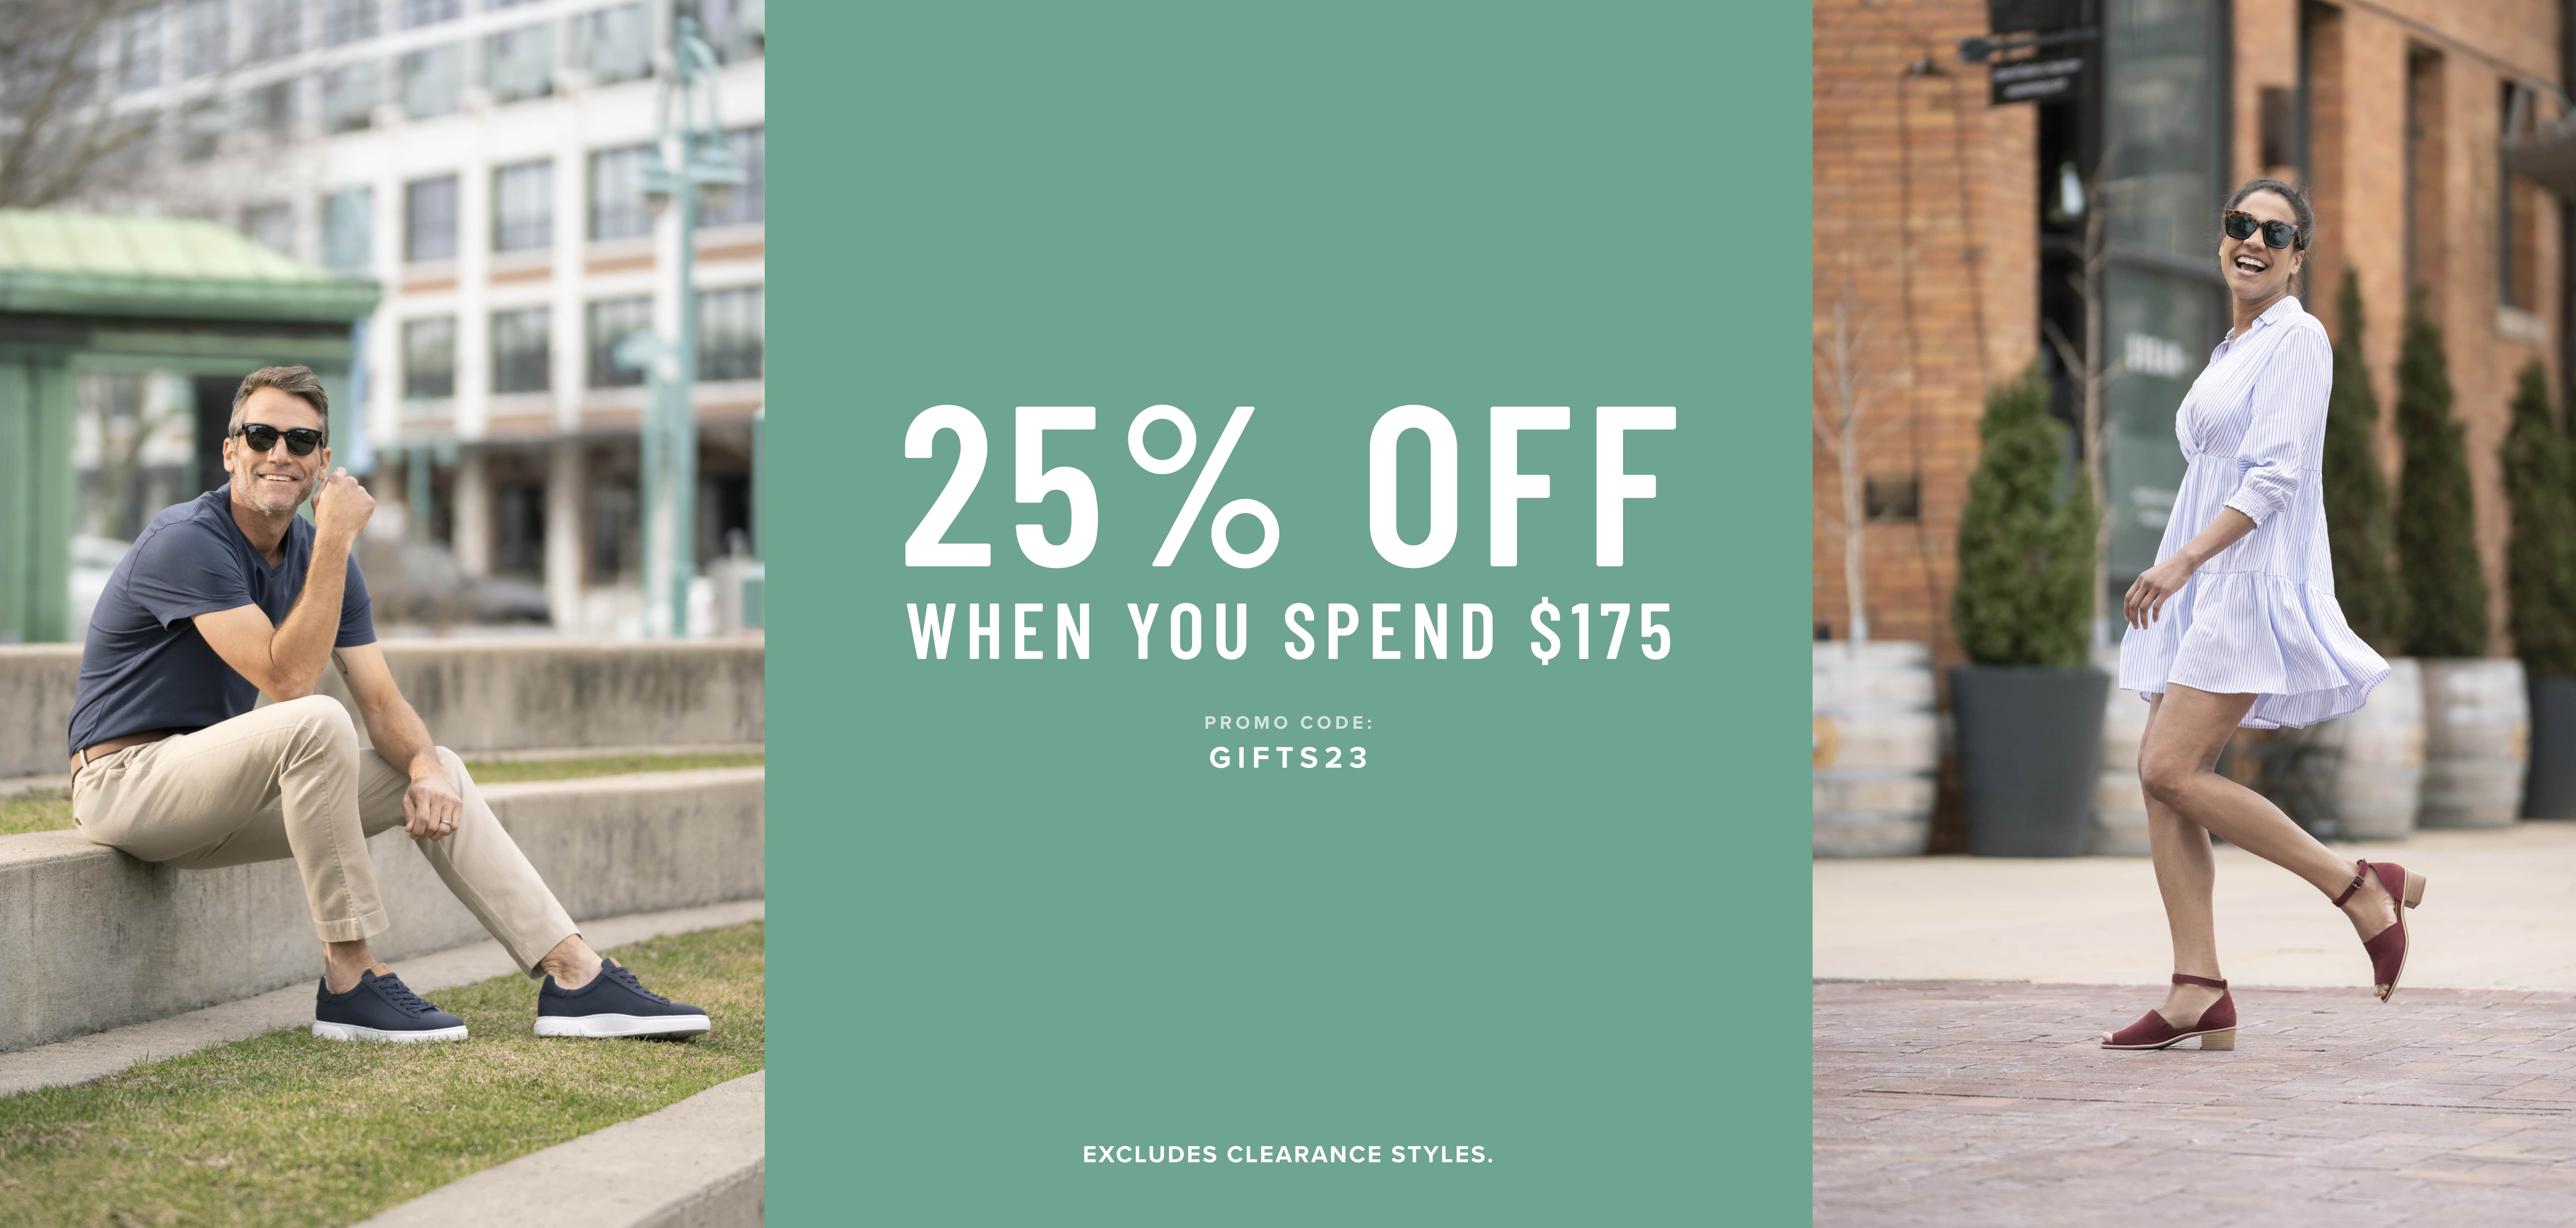 November - 25% off when you spend $175